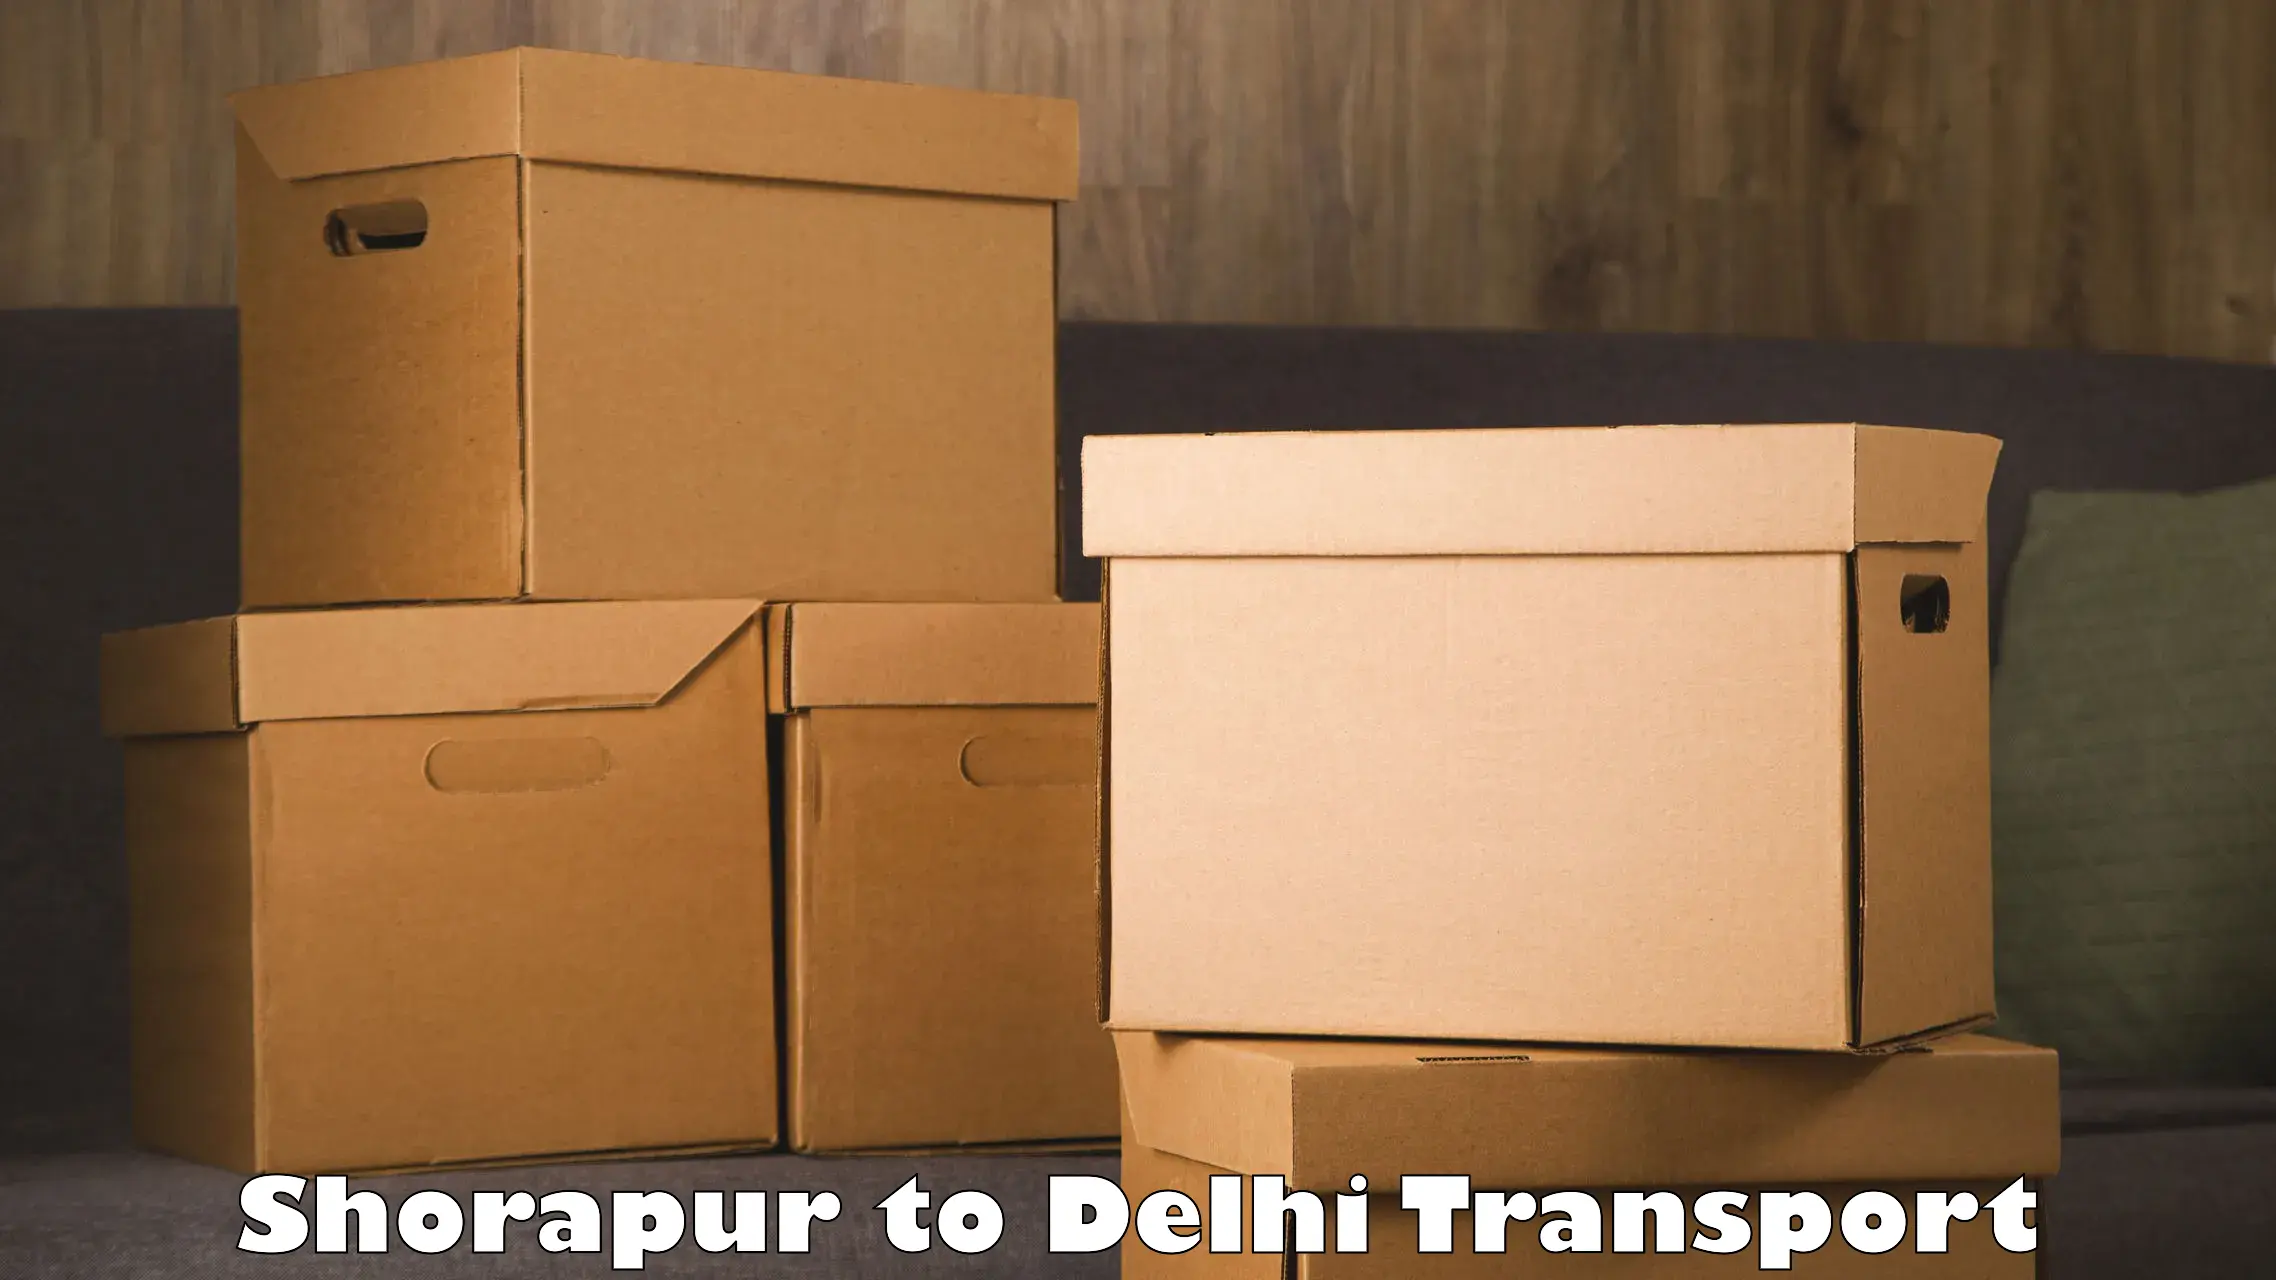 Two wheeler parcel service Shorapur to Lodhi Road